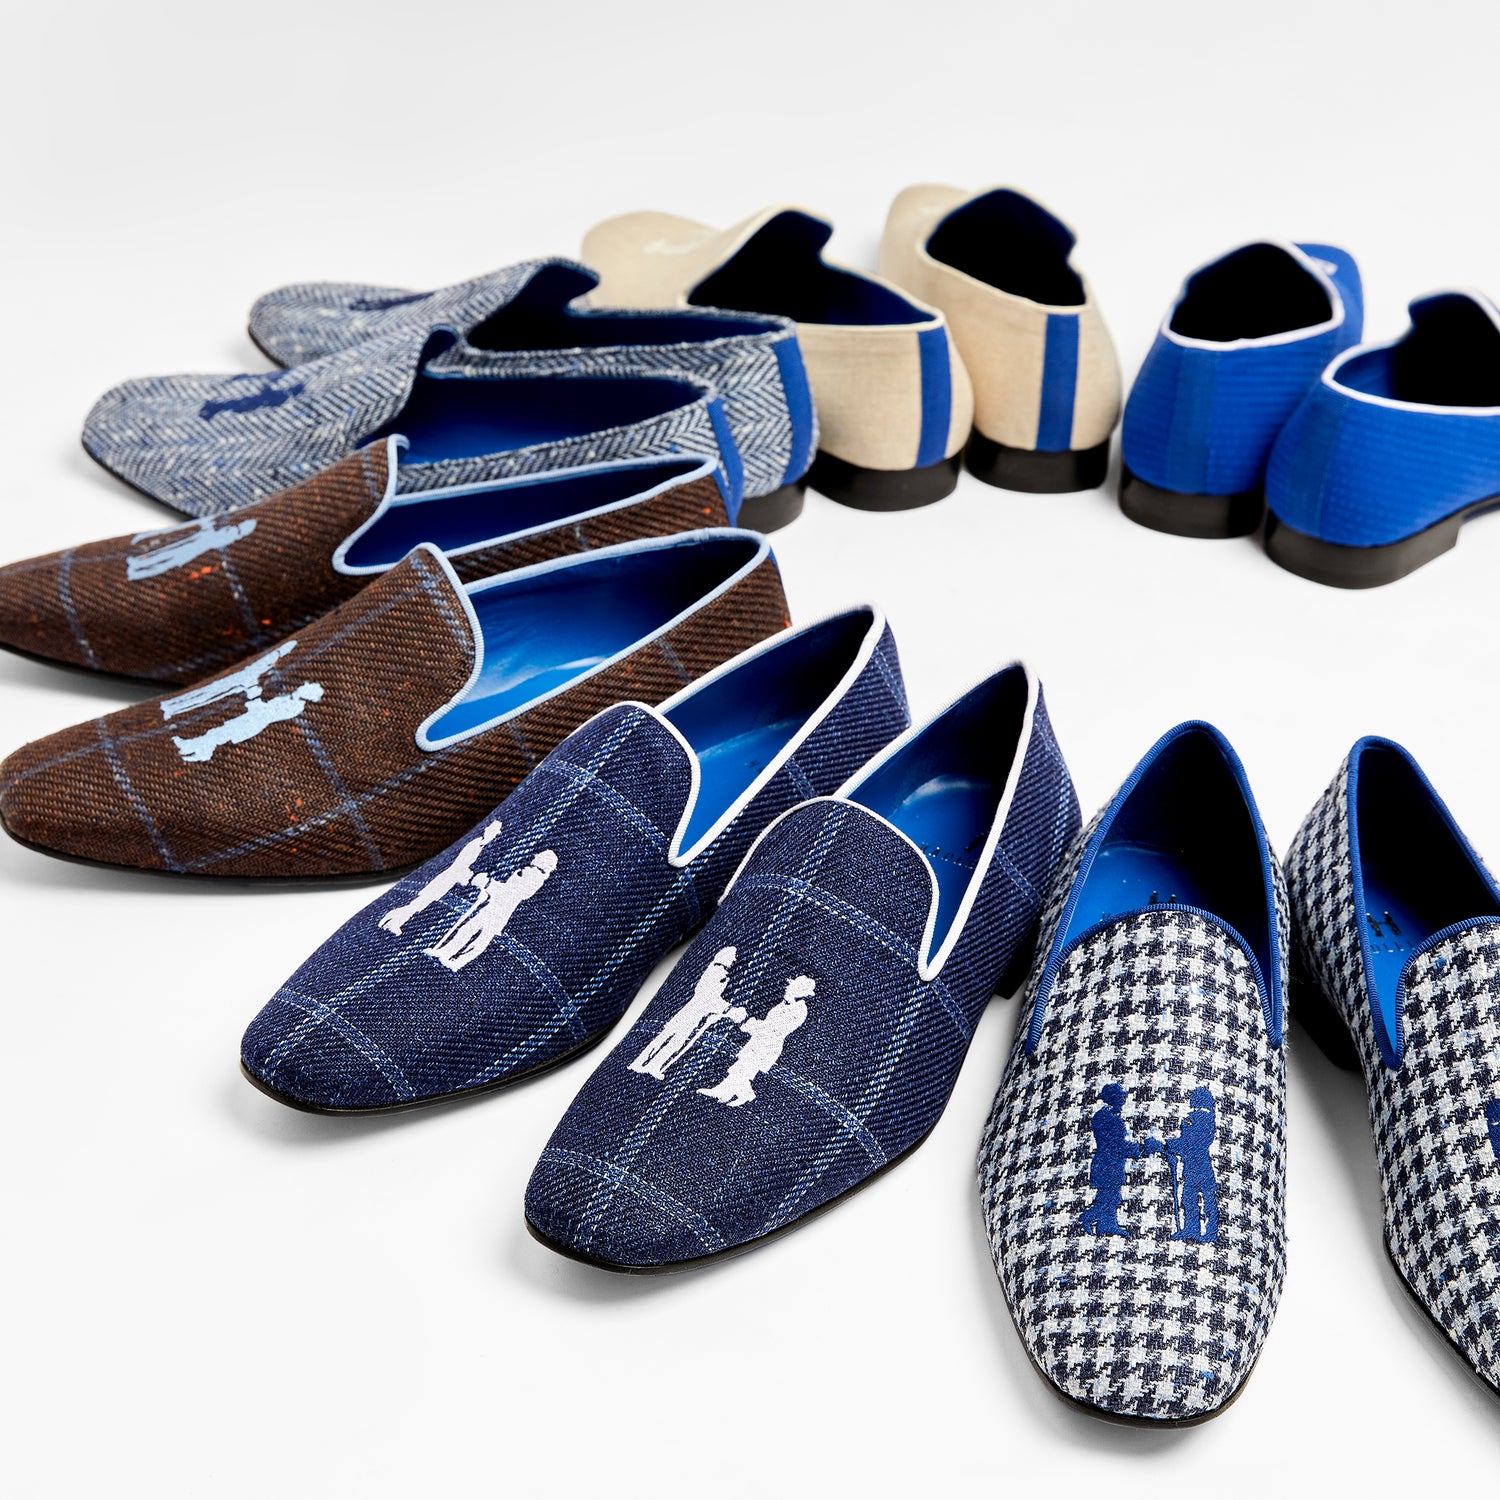 A collection of HMAN Slippers